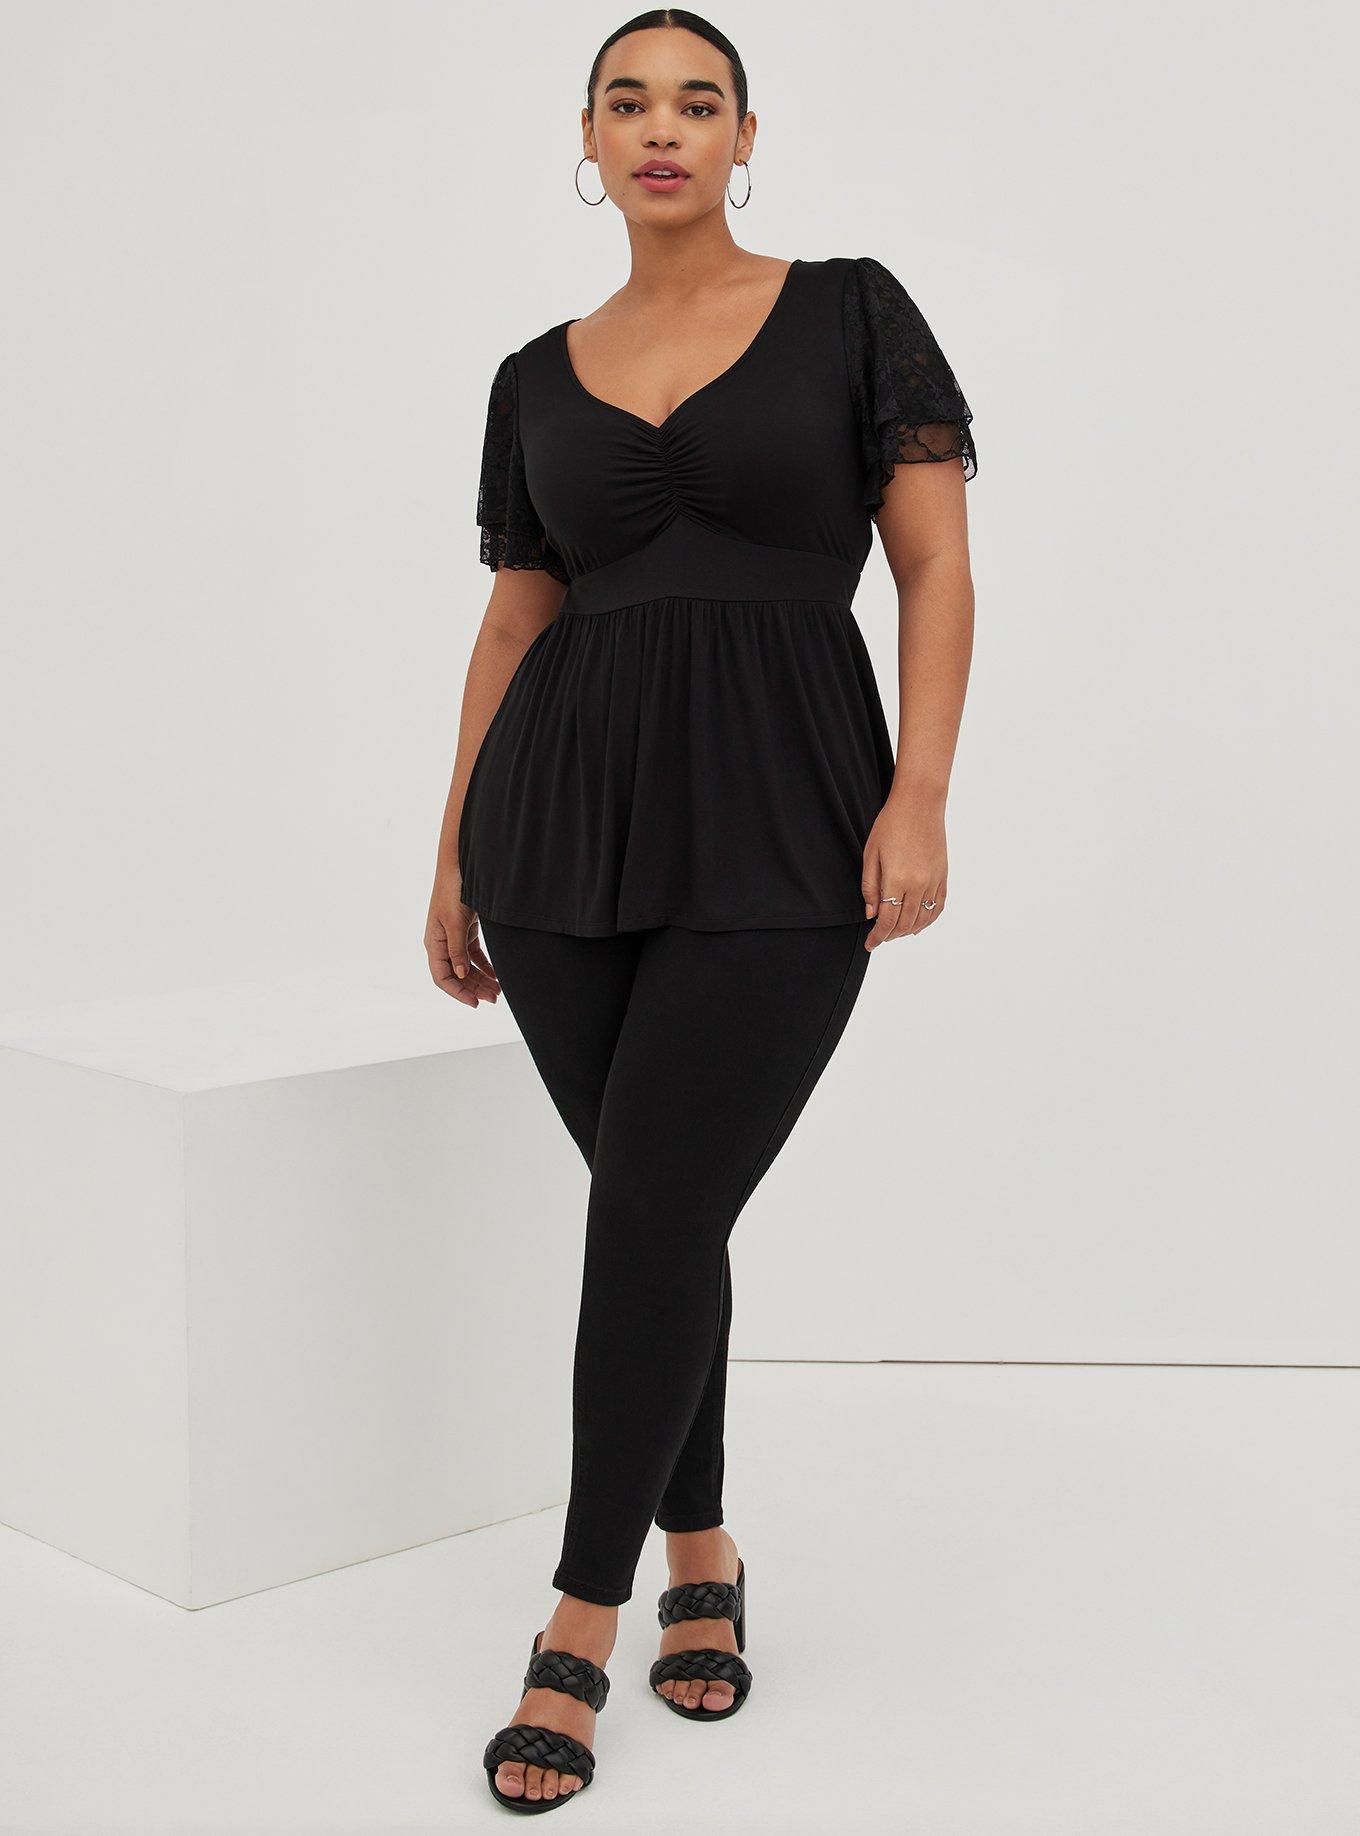 torrid, Tops, Torrid Size 2 Black Crepe Lace Sleeve Fit And Flare Top